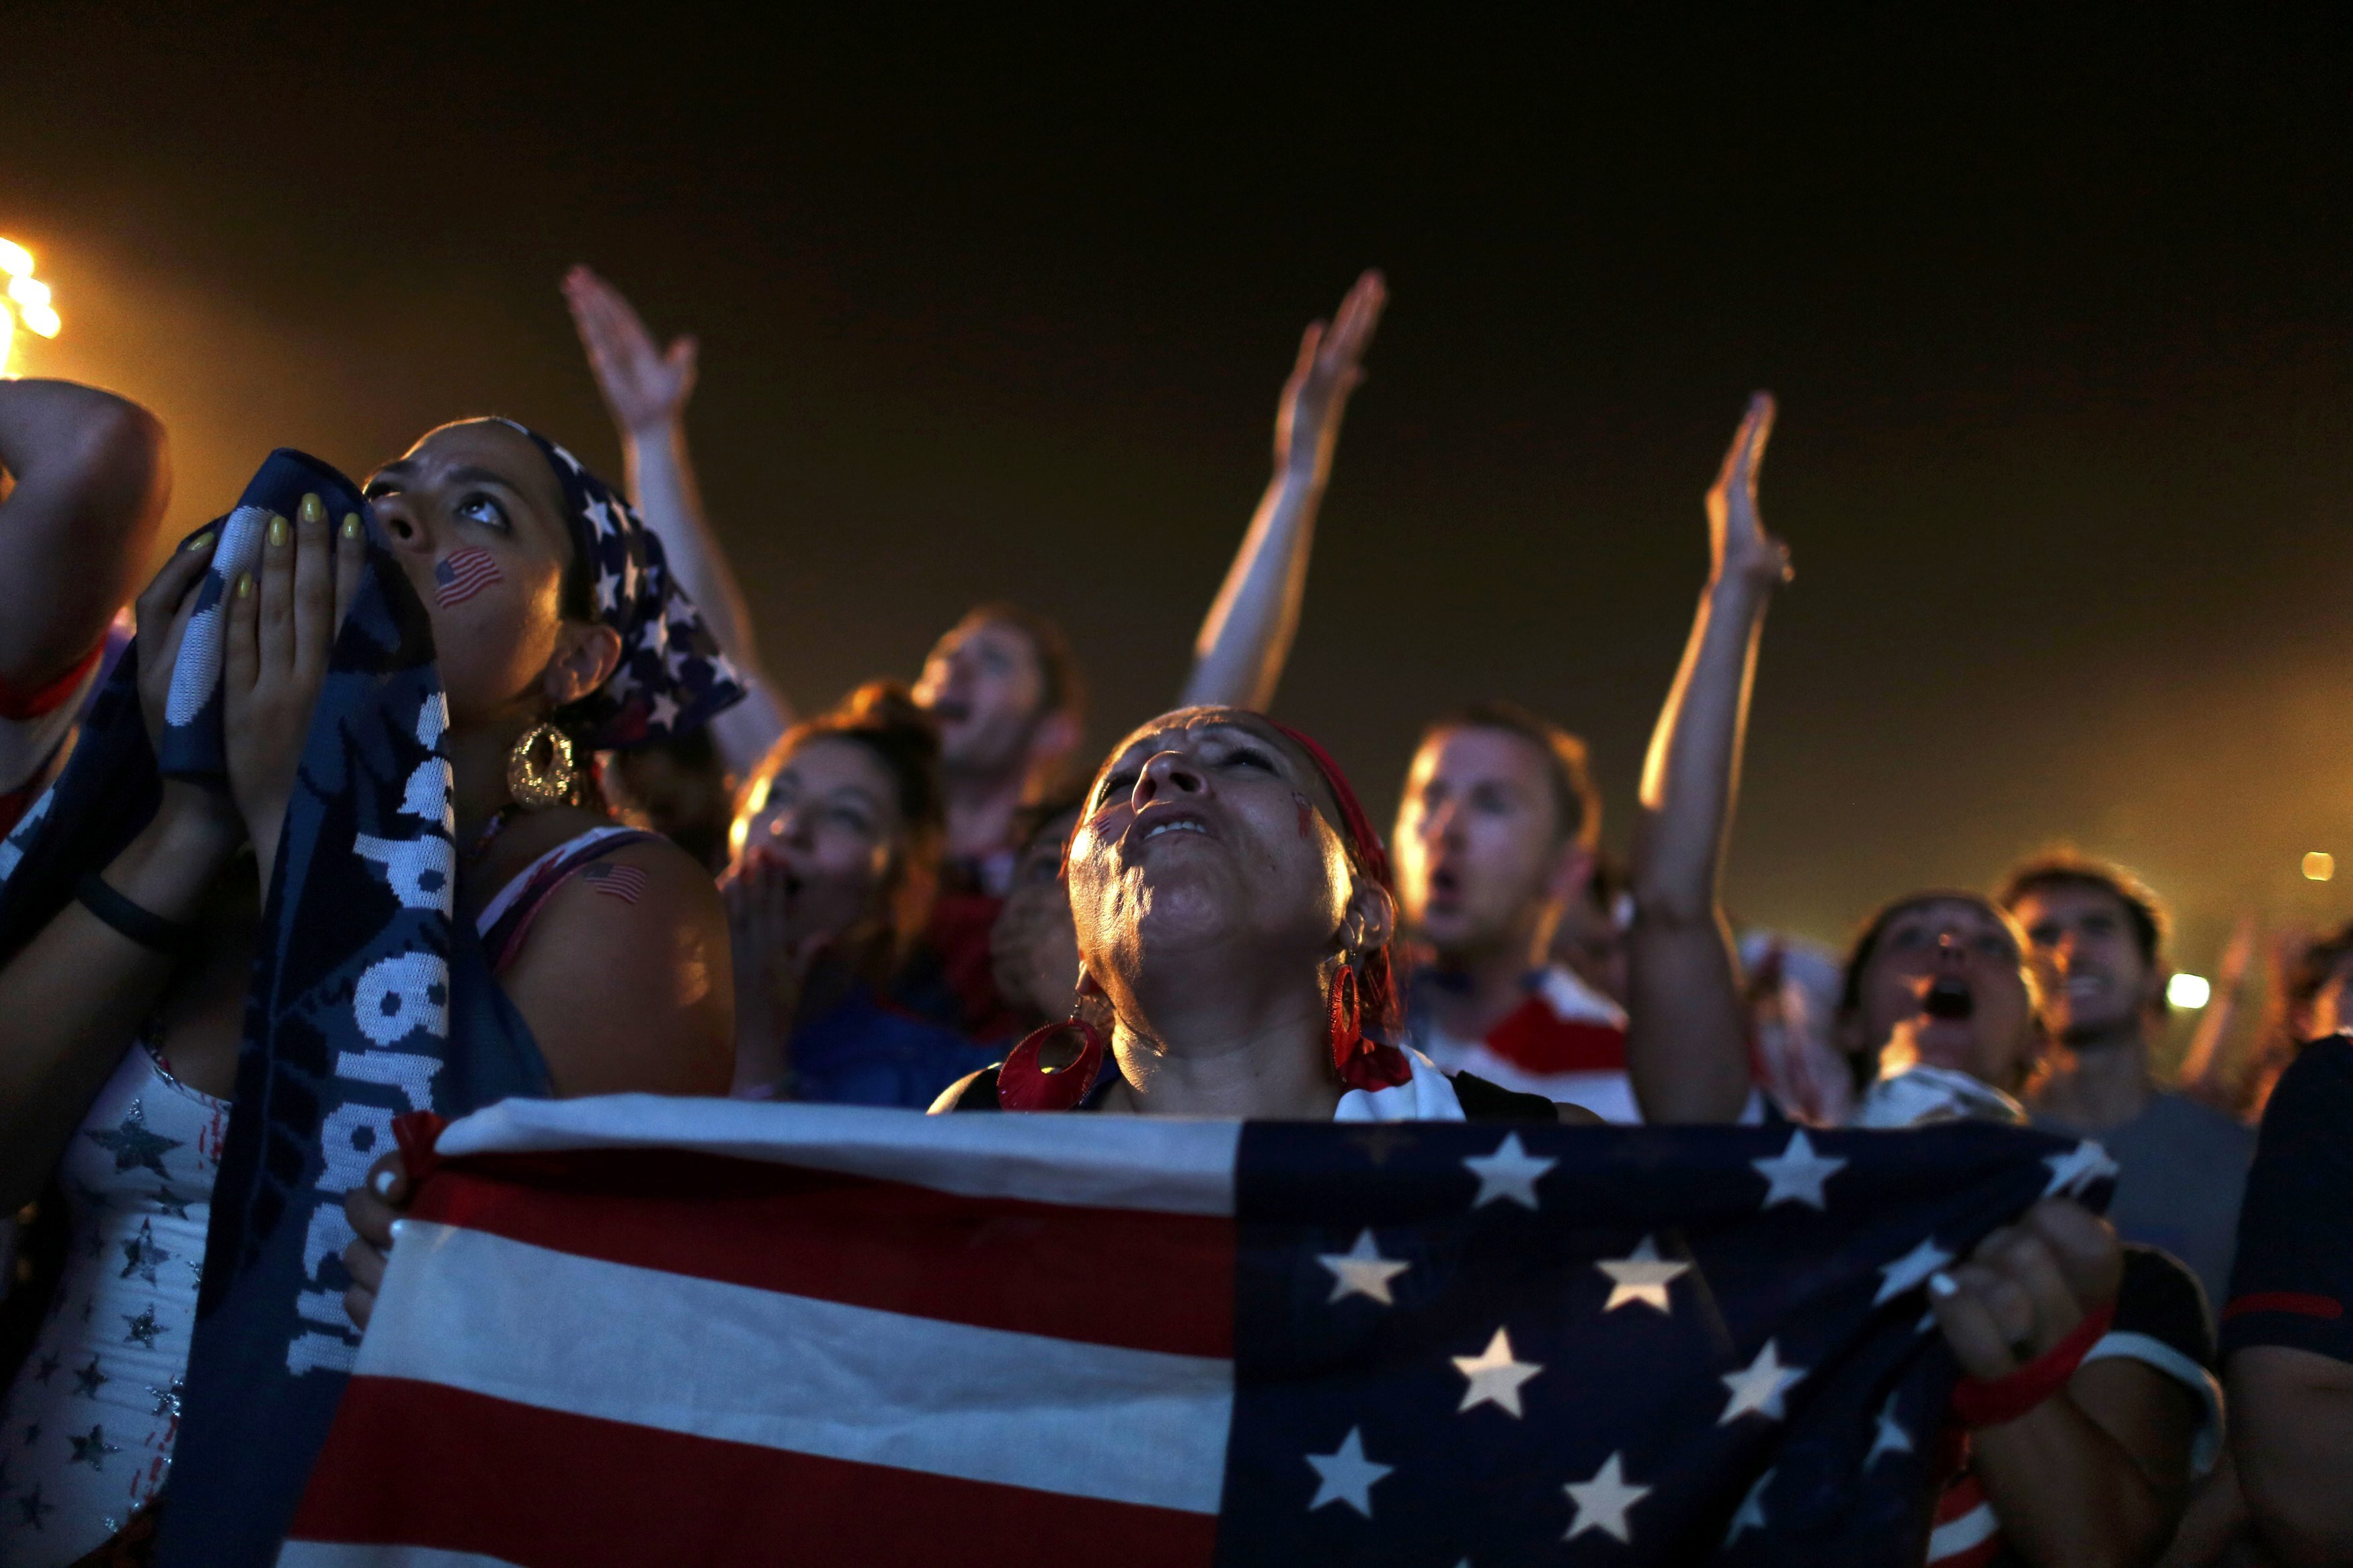 U.S. fans react as they watch the match between U.S. and Ghana on a large screen at Copacabana beach in Rio de Janeiro on June 16, 2014.